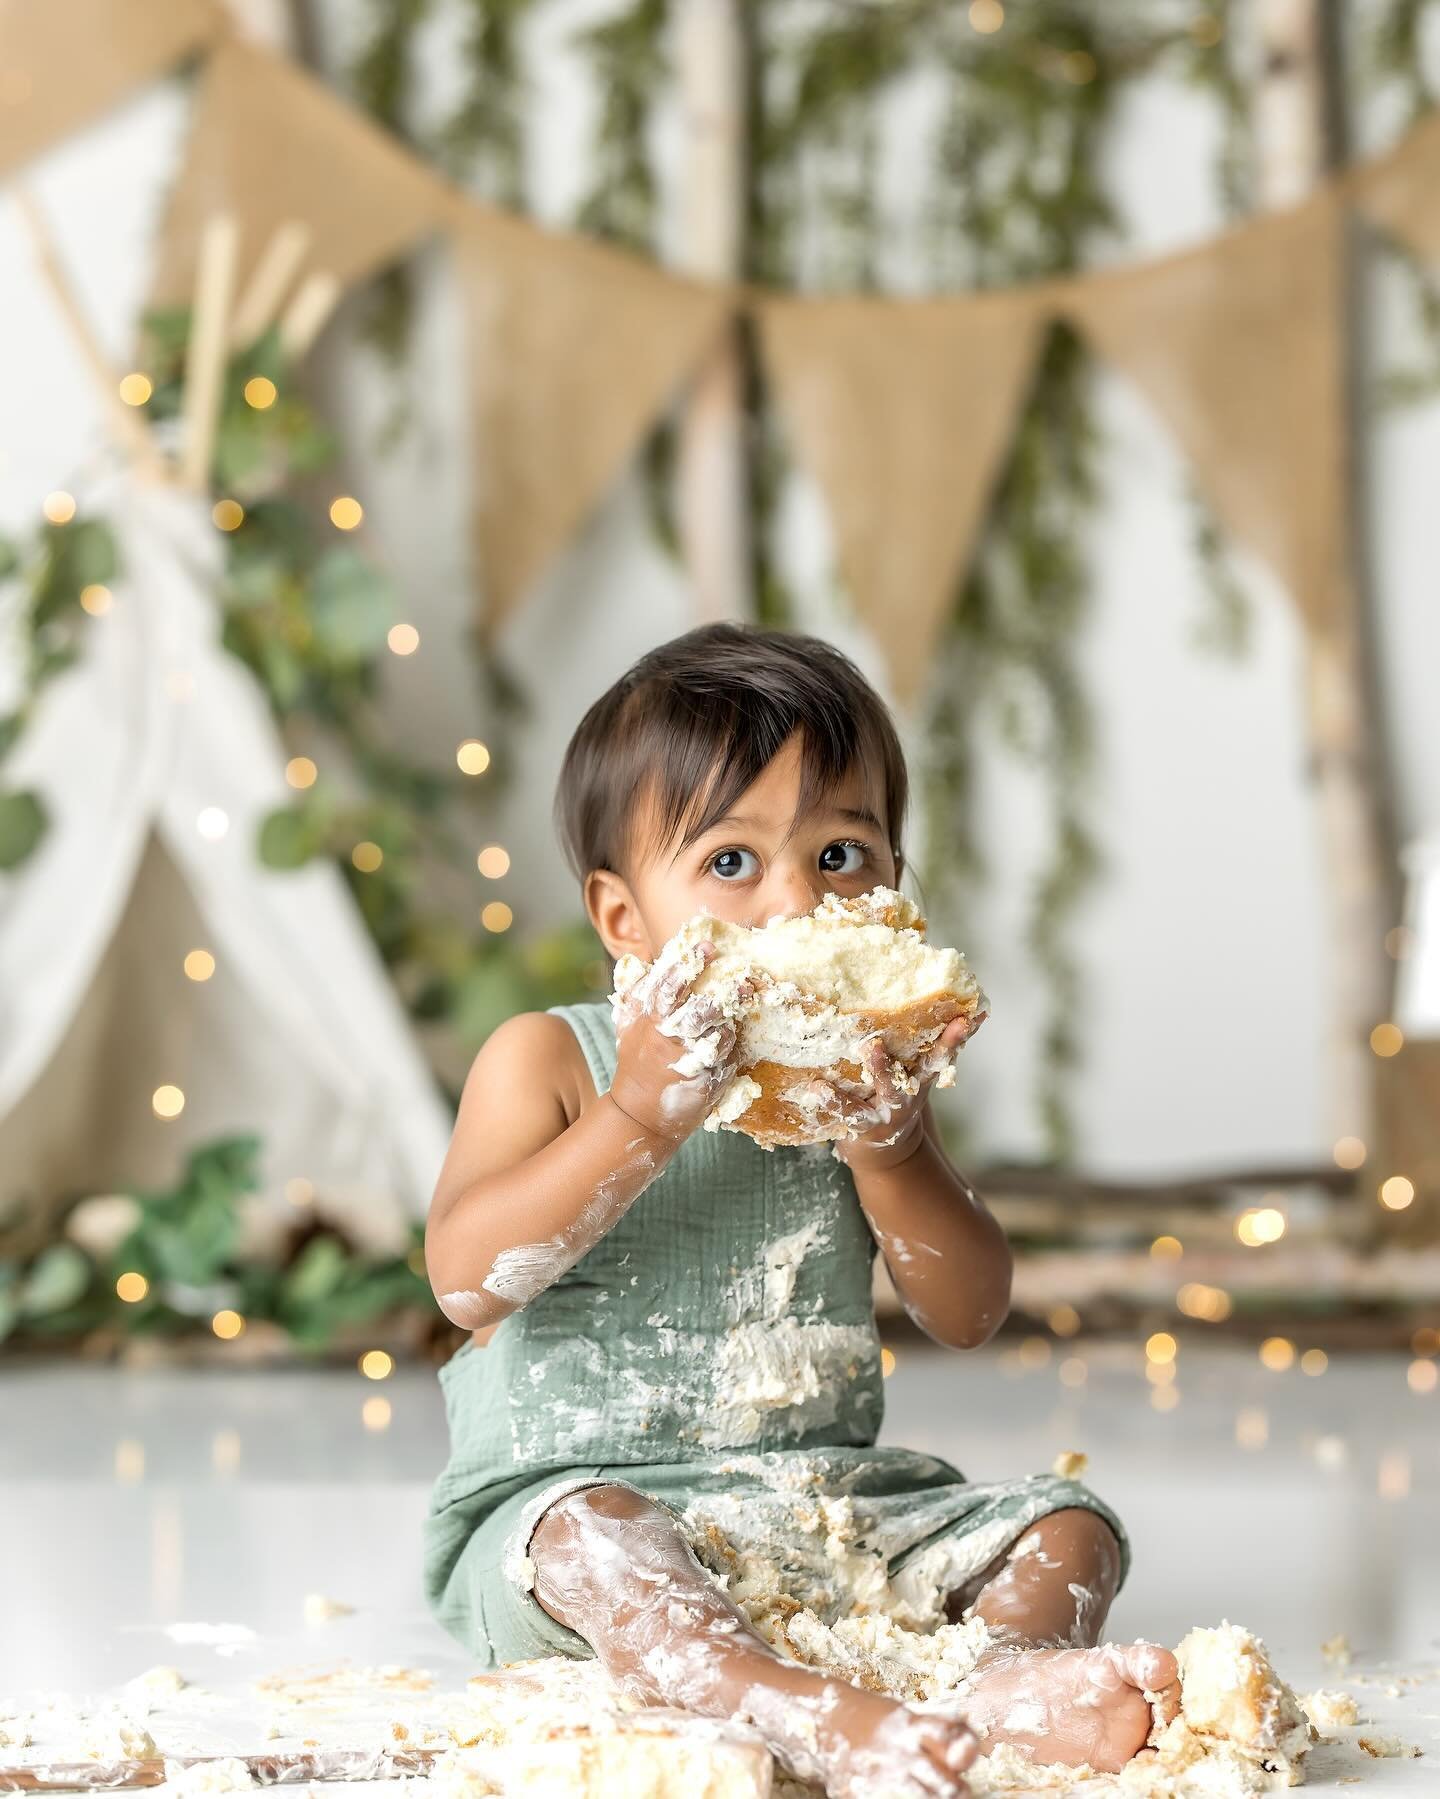 Love the earthy tones and rustic vibes for baby boy! 🍃 and YES, he picked up the entire cake and ate it 🤣

Did you know? I provide all the props, cake, balloons, and even have some outfits available for use for your baby&rsquo;s cake smash session!